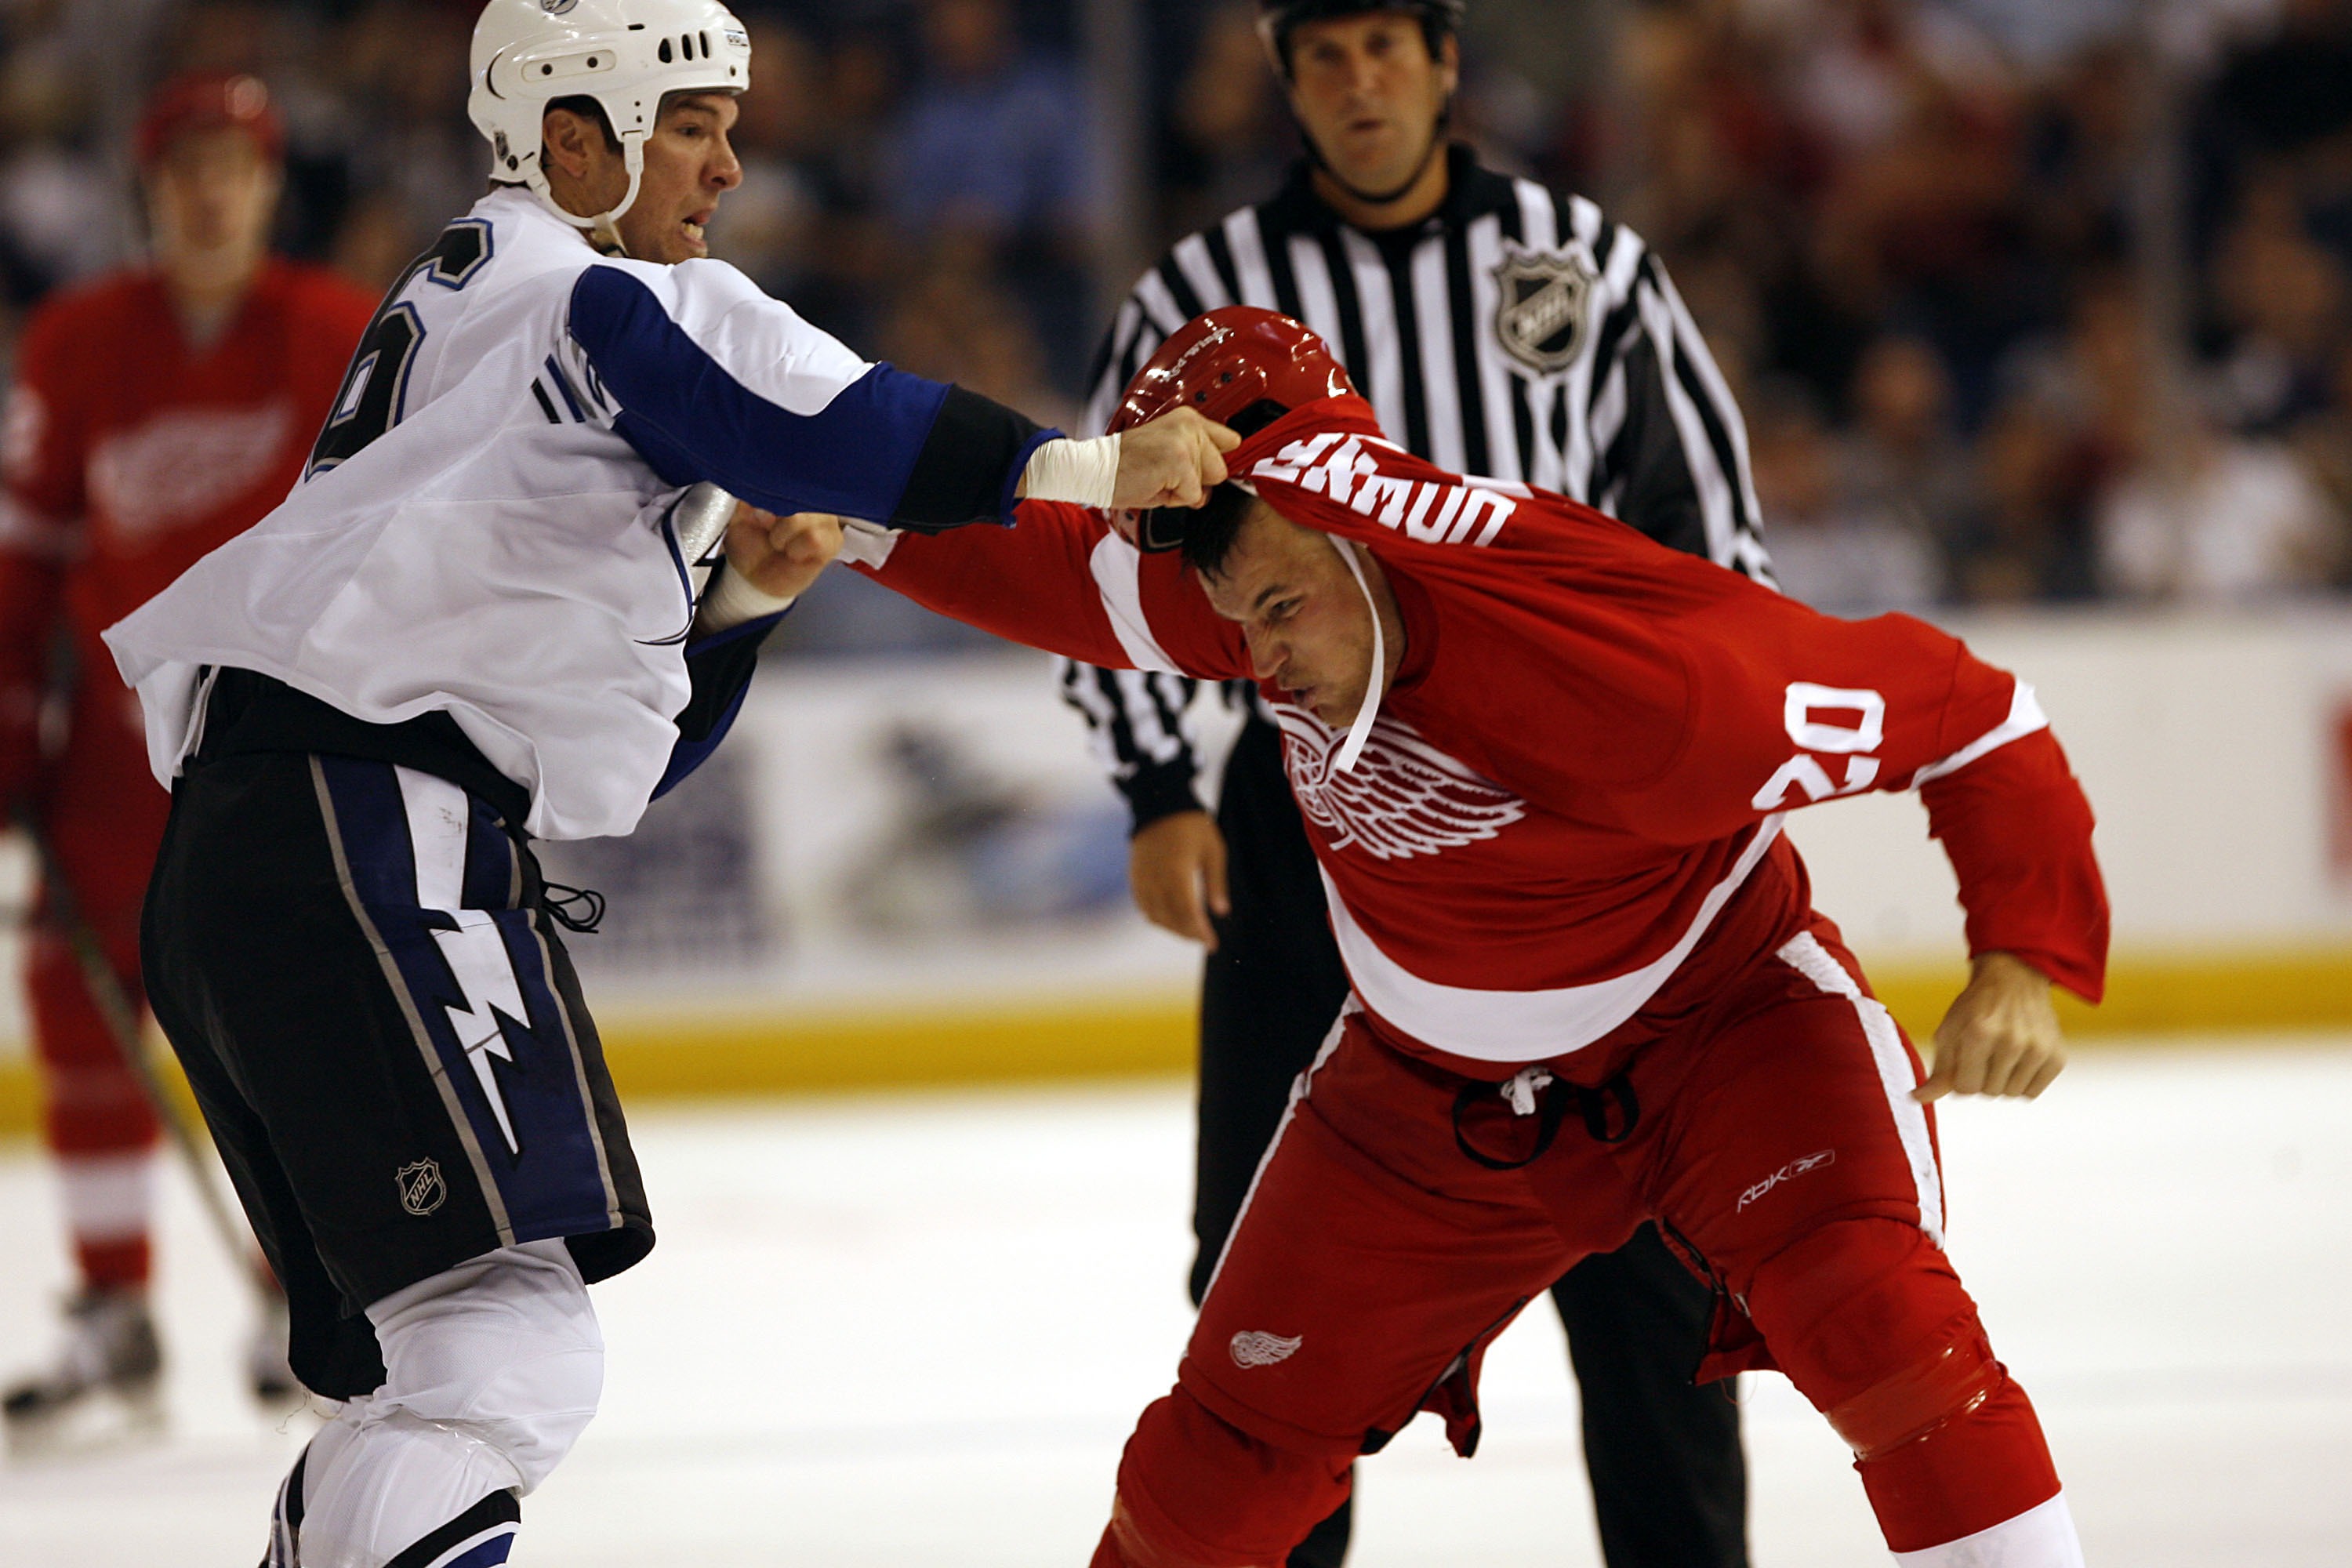 Former Red Wing Darren McCarty says Mike Babcock cost Detroit the